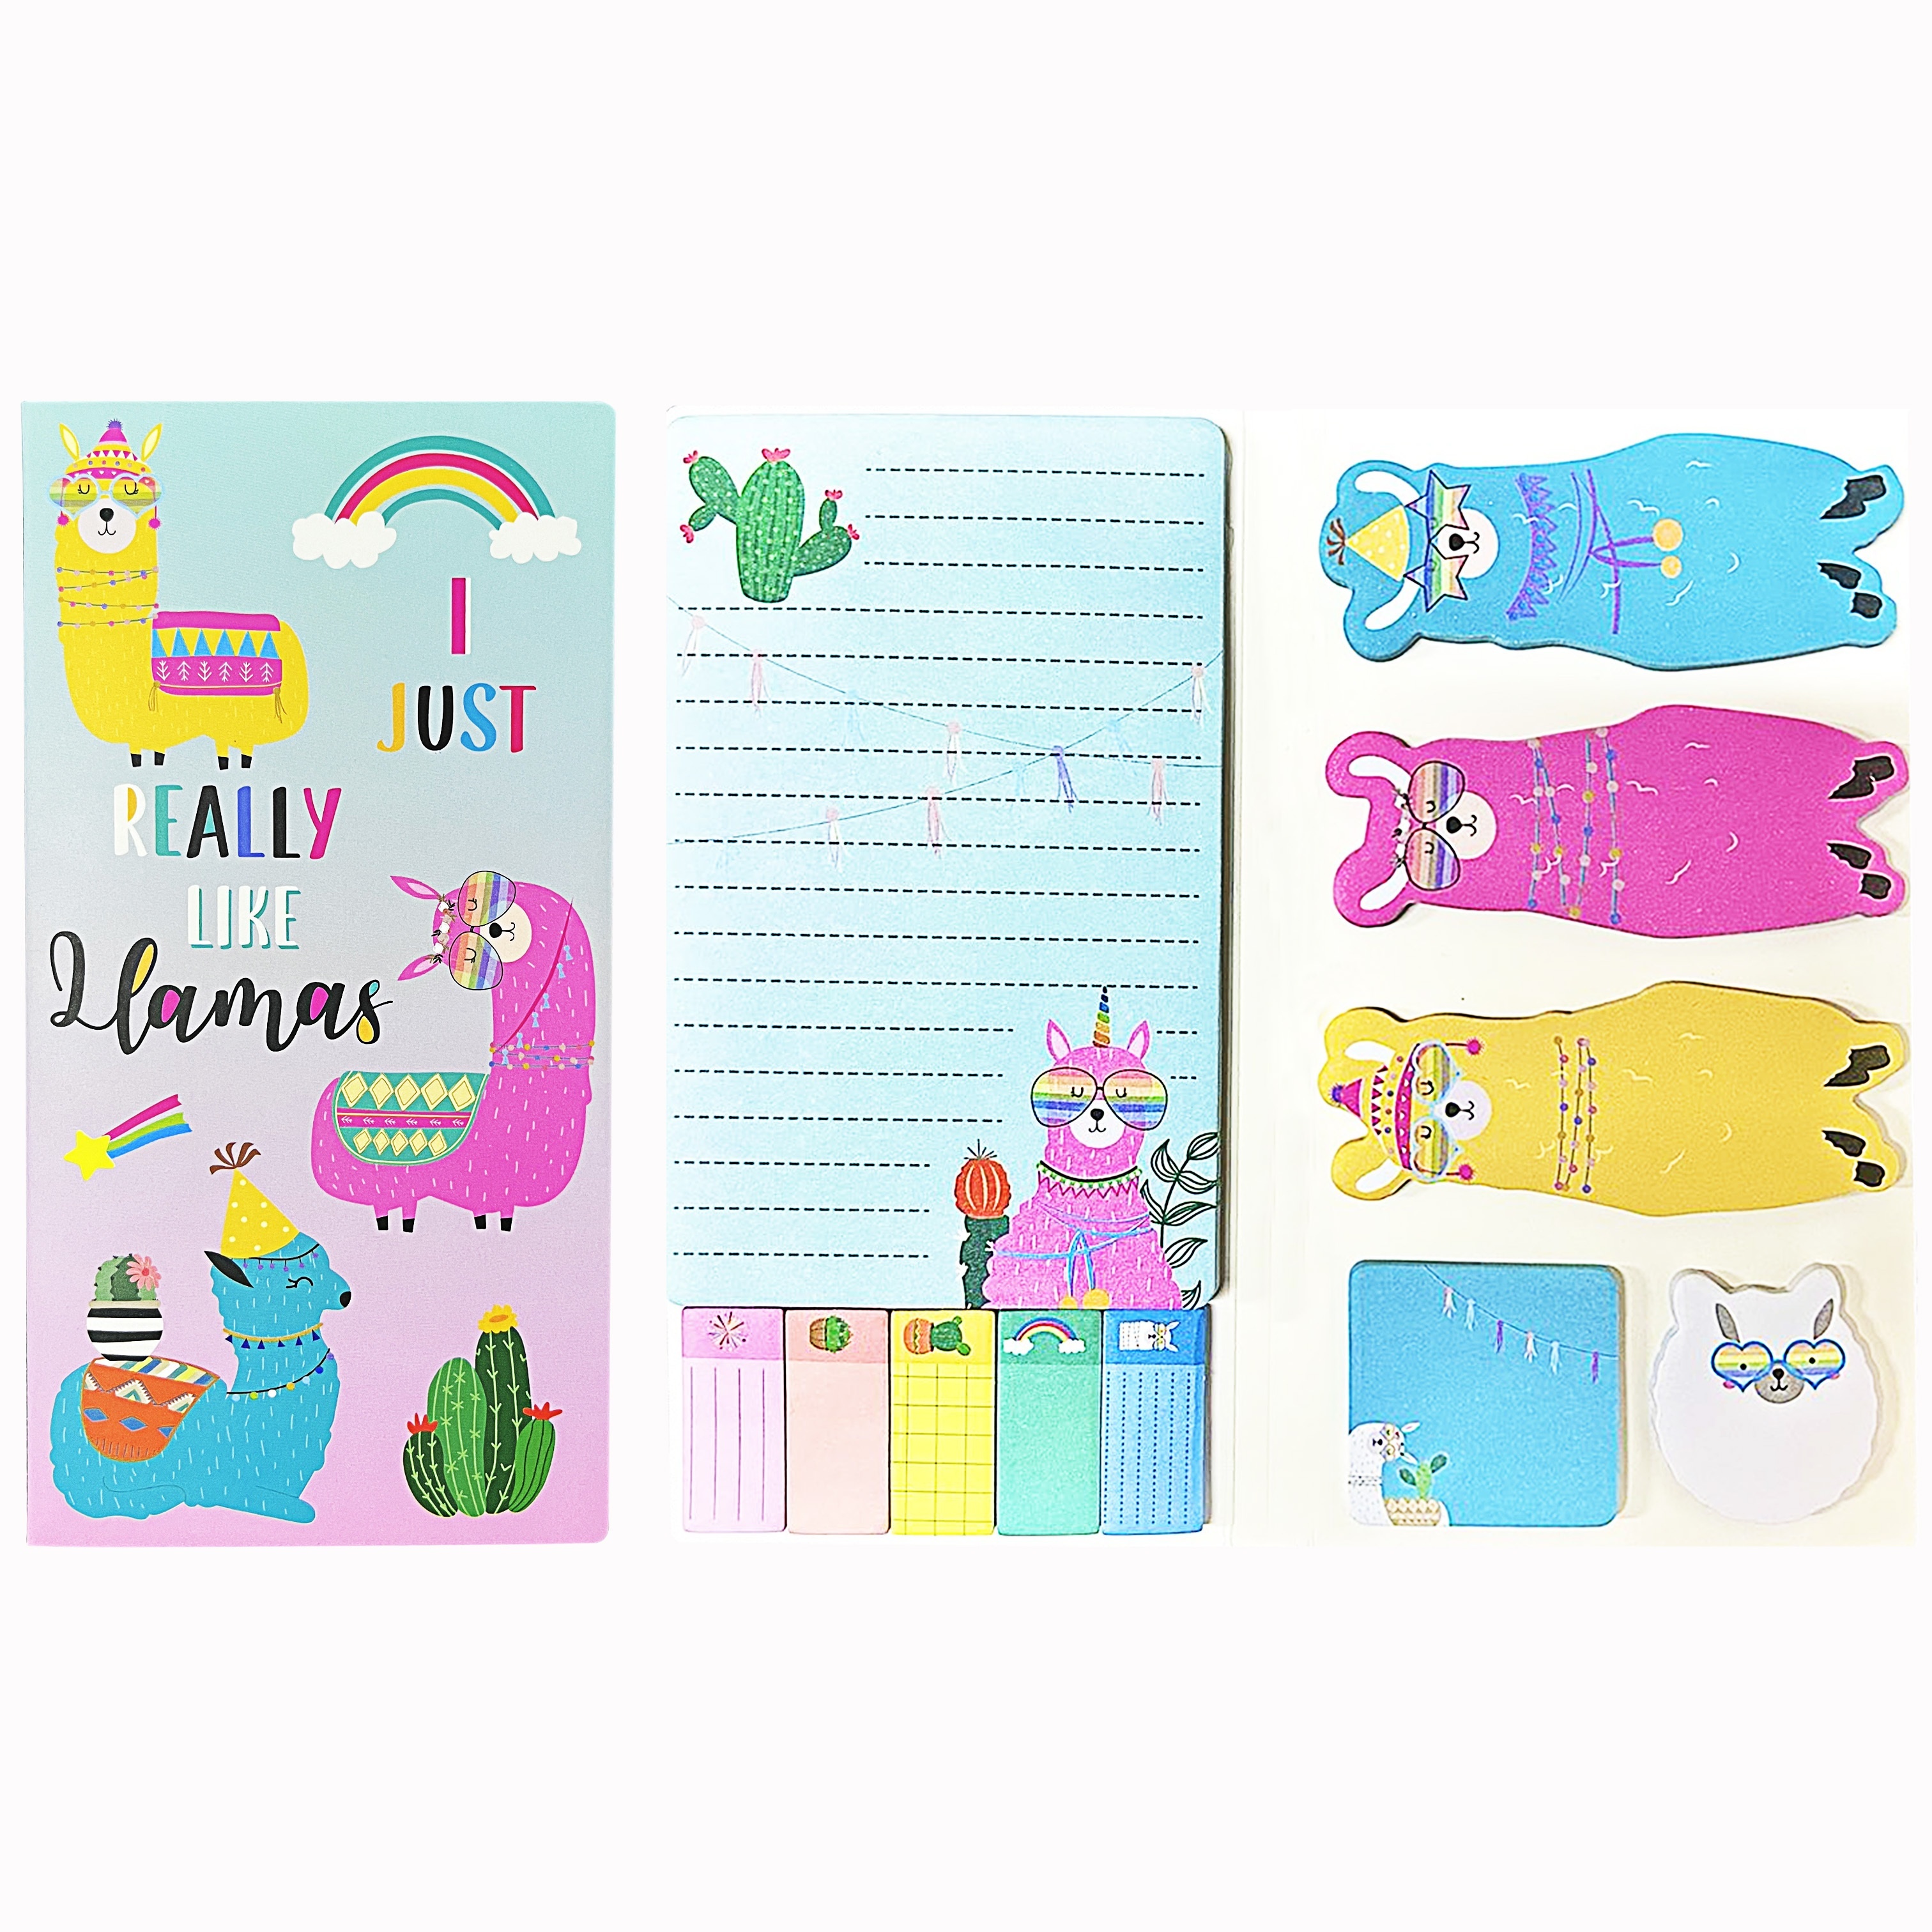 

1 Pack Llama Theme Sticky Notes Set With 550 Sheets - Cartoon Alpaca Self-adhesive Memo Pads & Page Markers - Office And School Divider Tabs Bundle - Cute Animal Stationery Gift